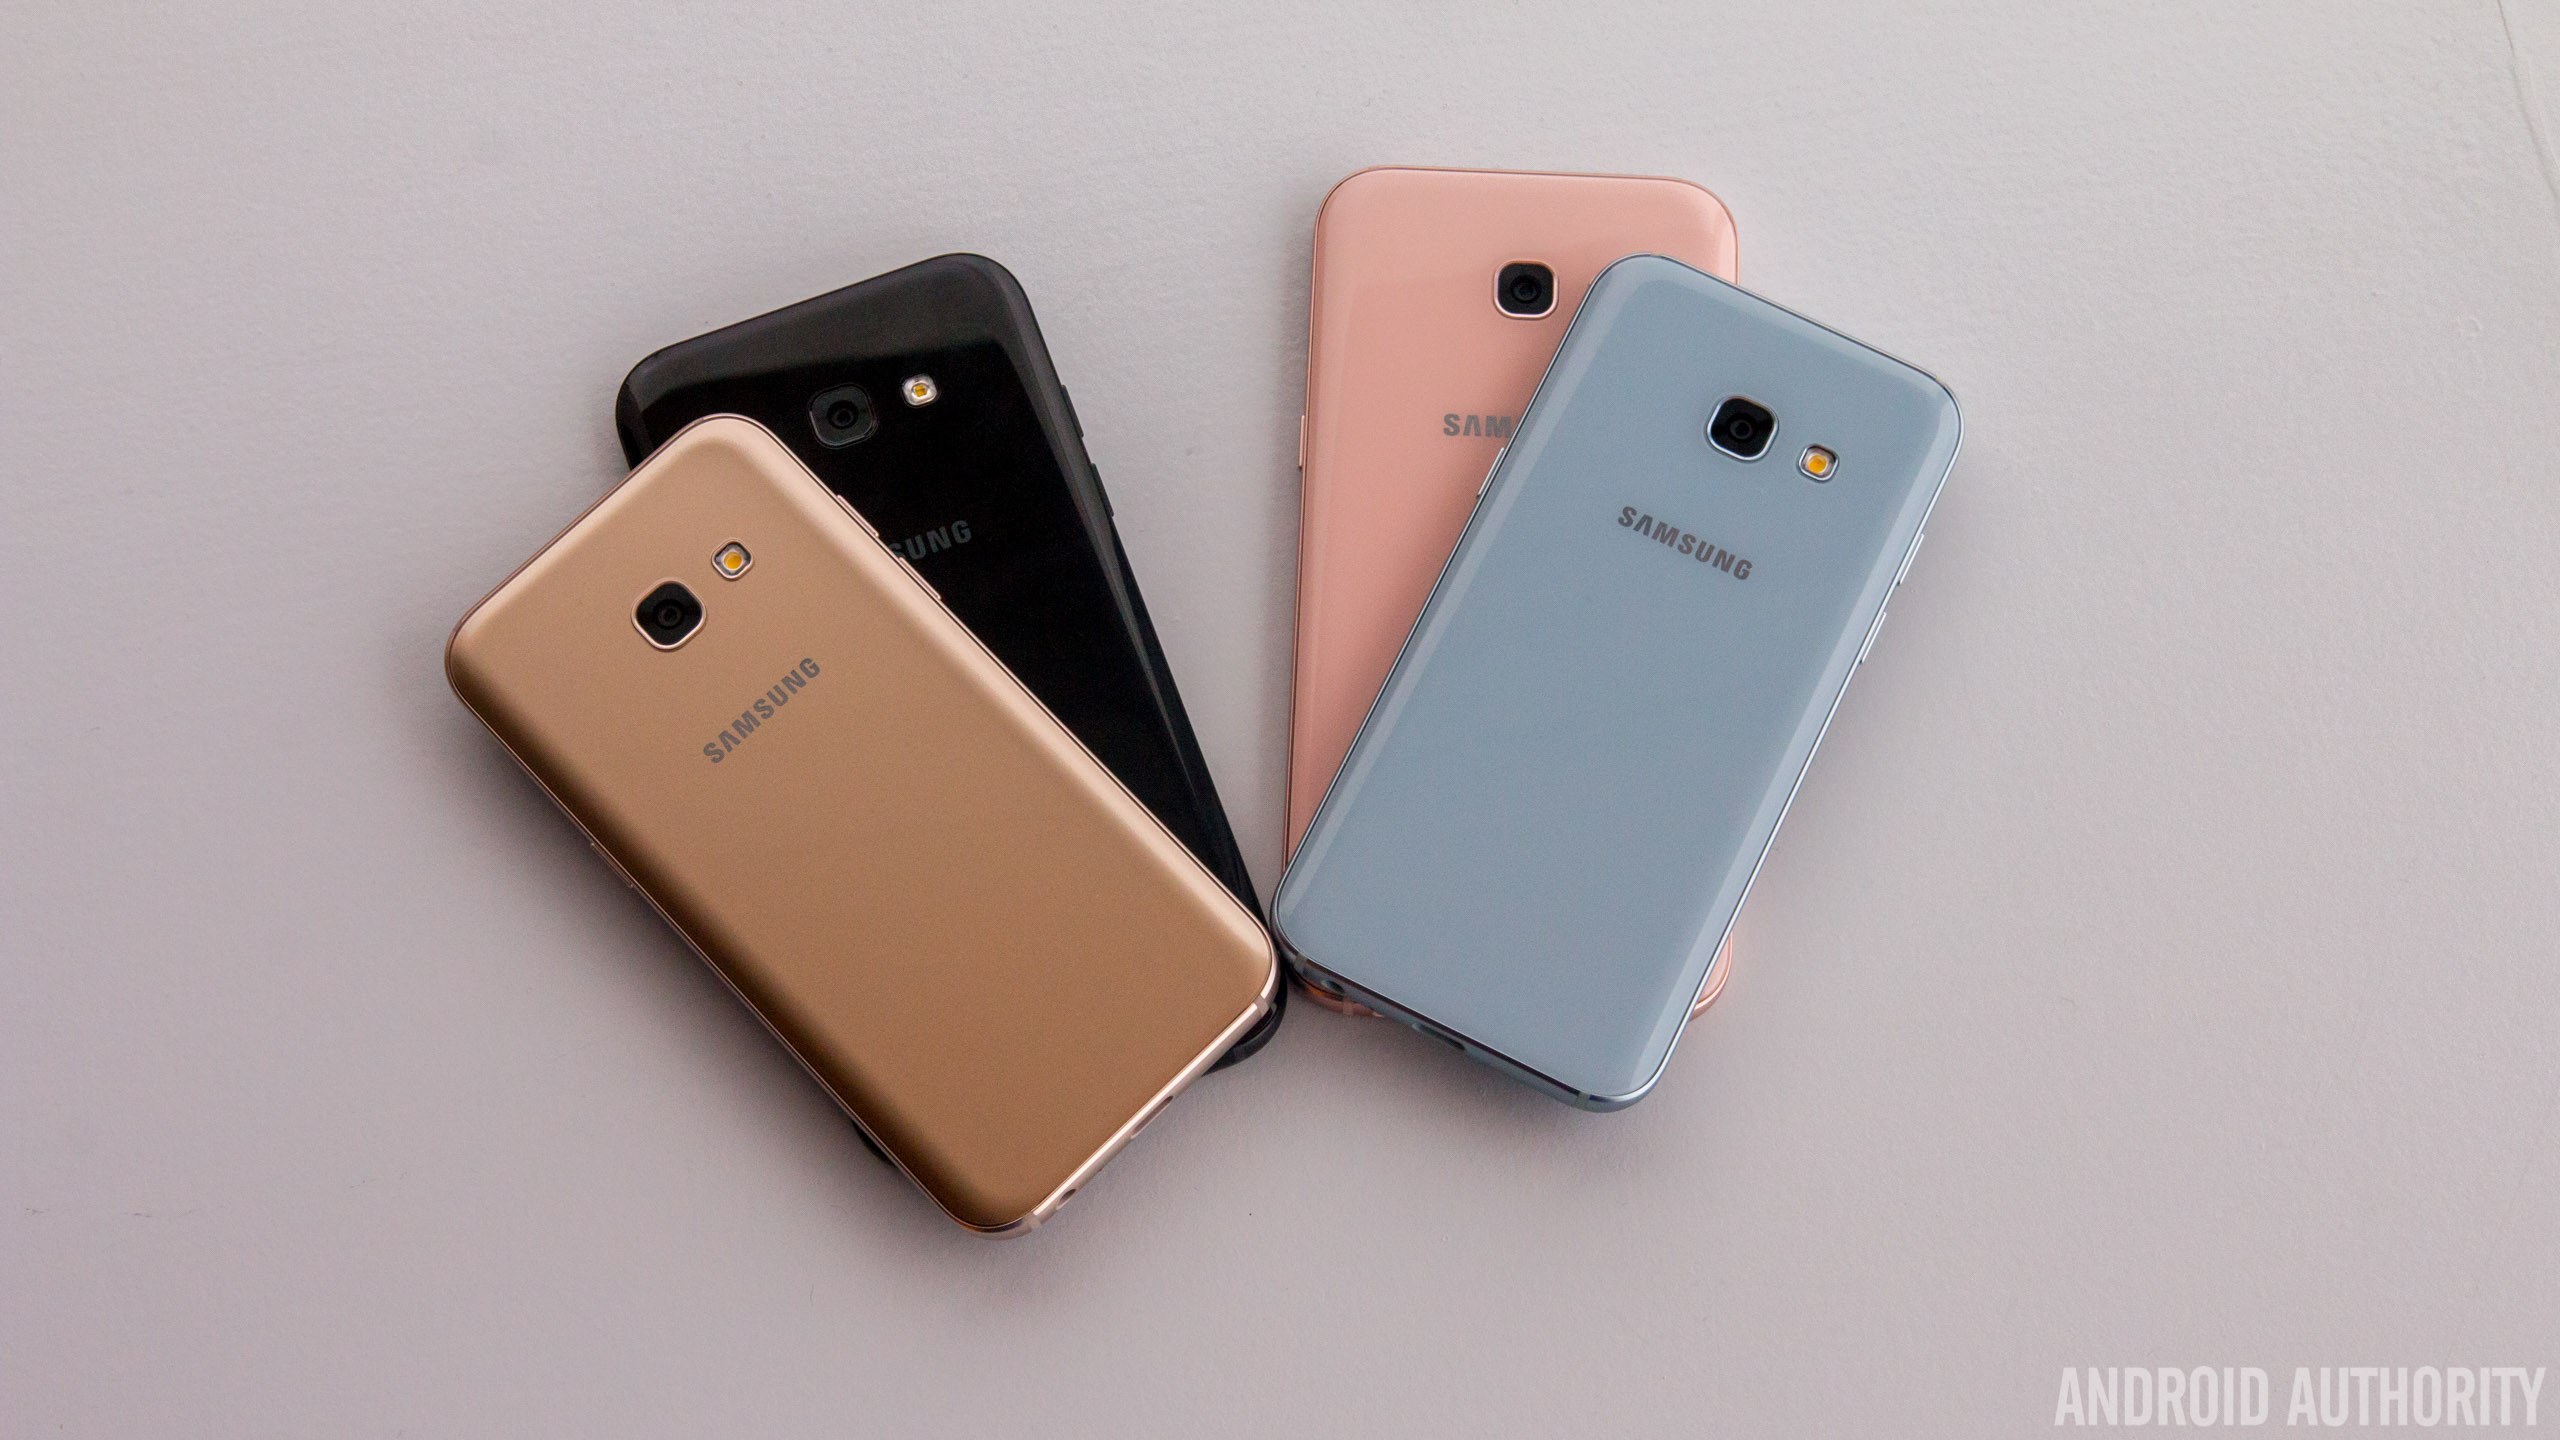 Samsung Galaxy A3 2017 hands-on Android Authority